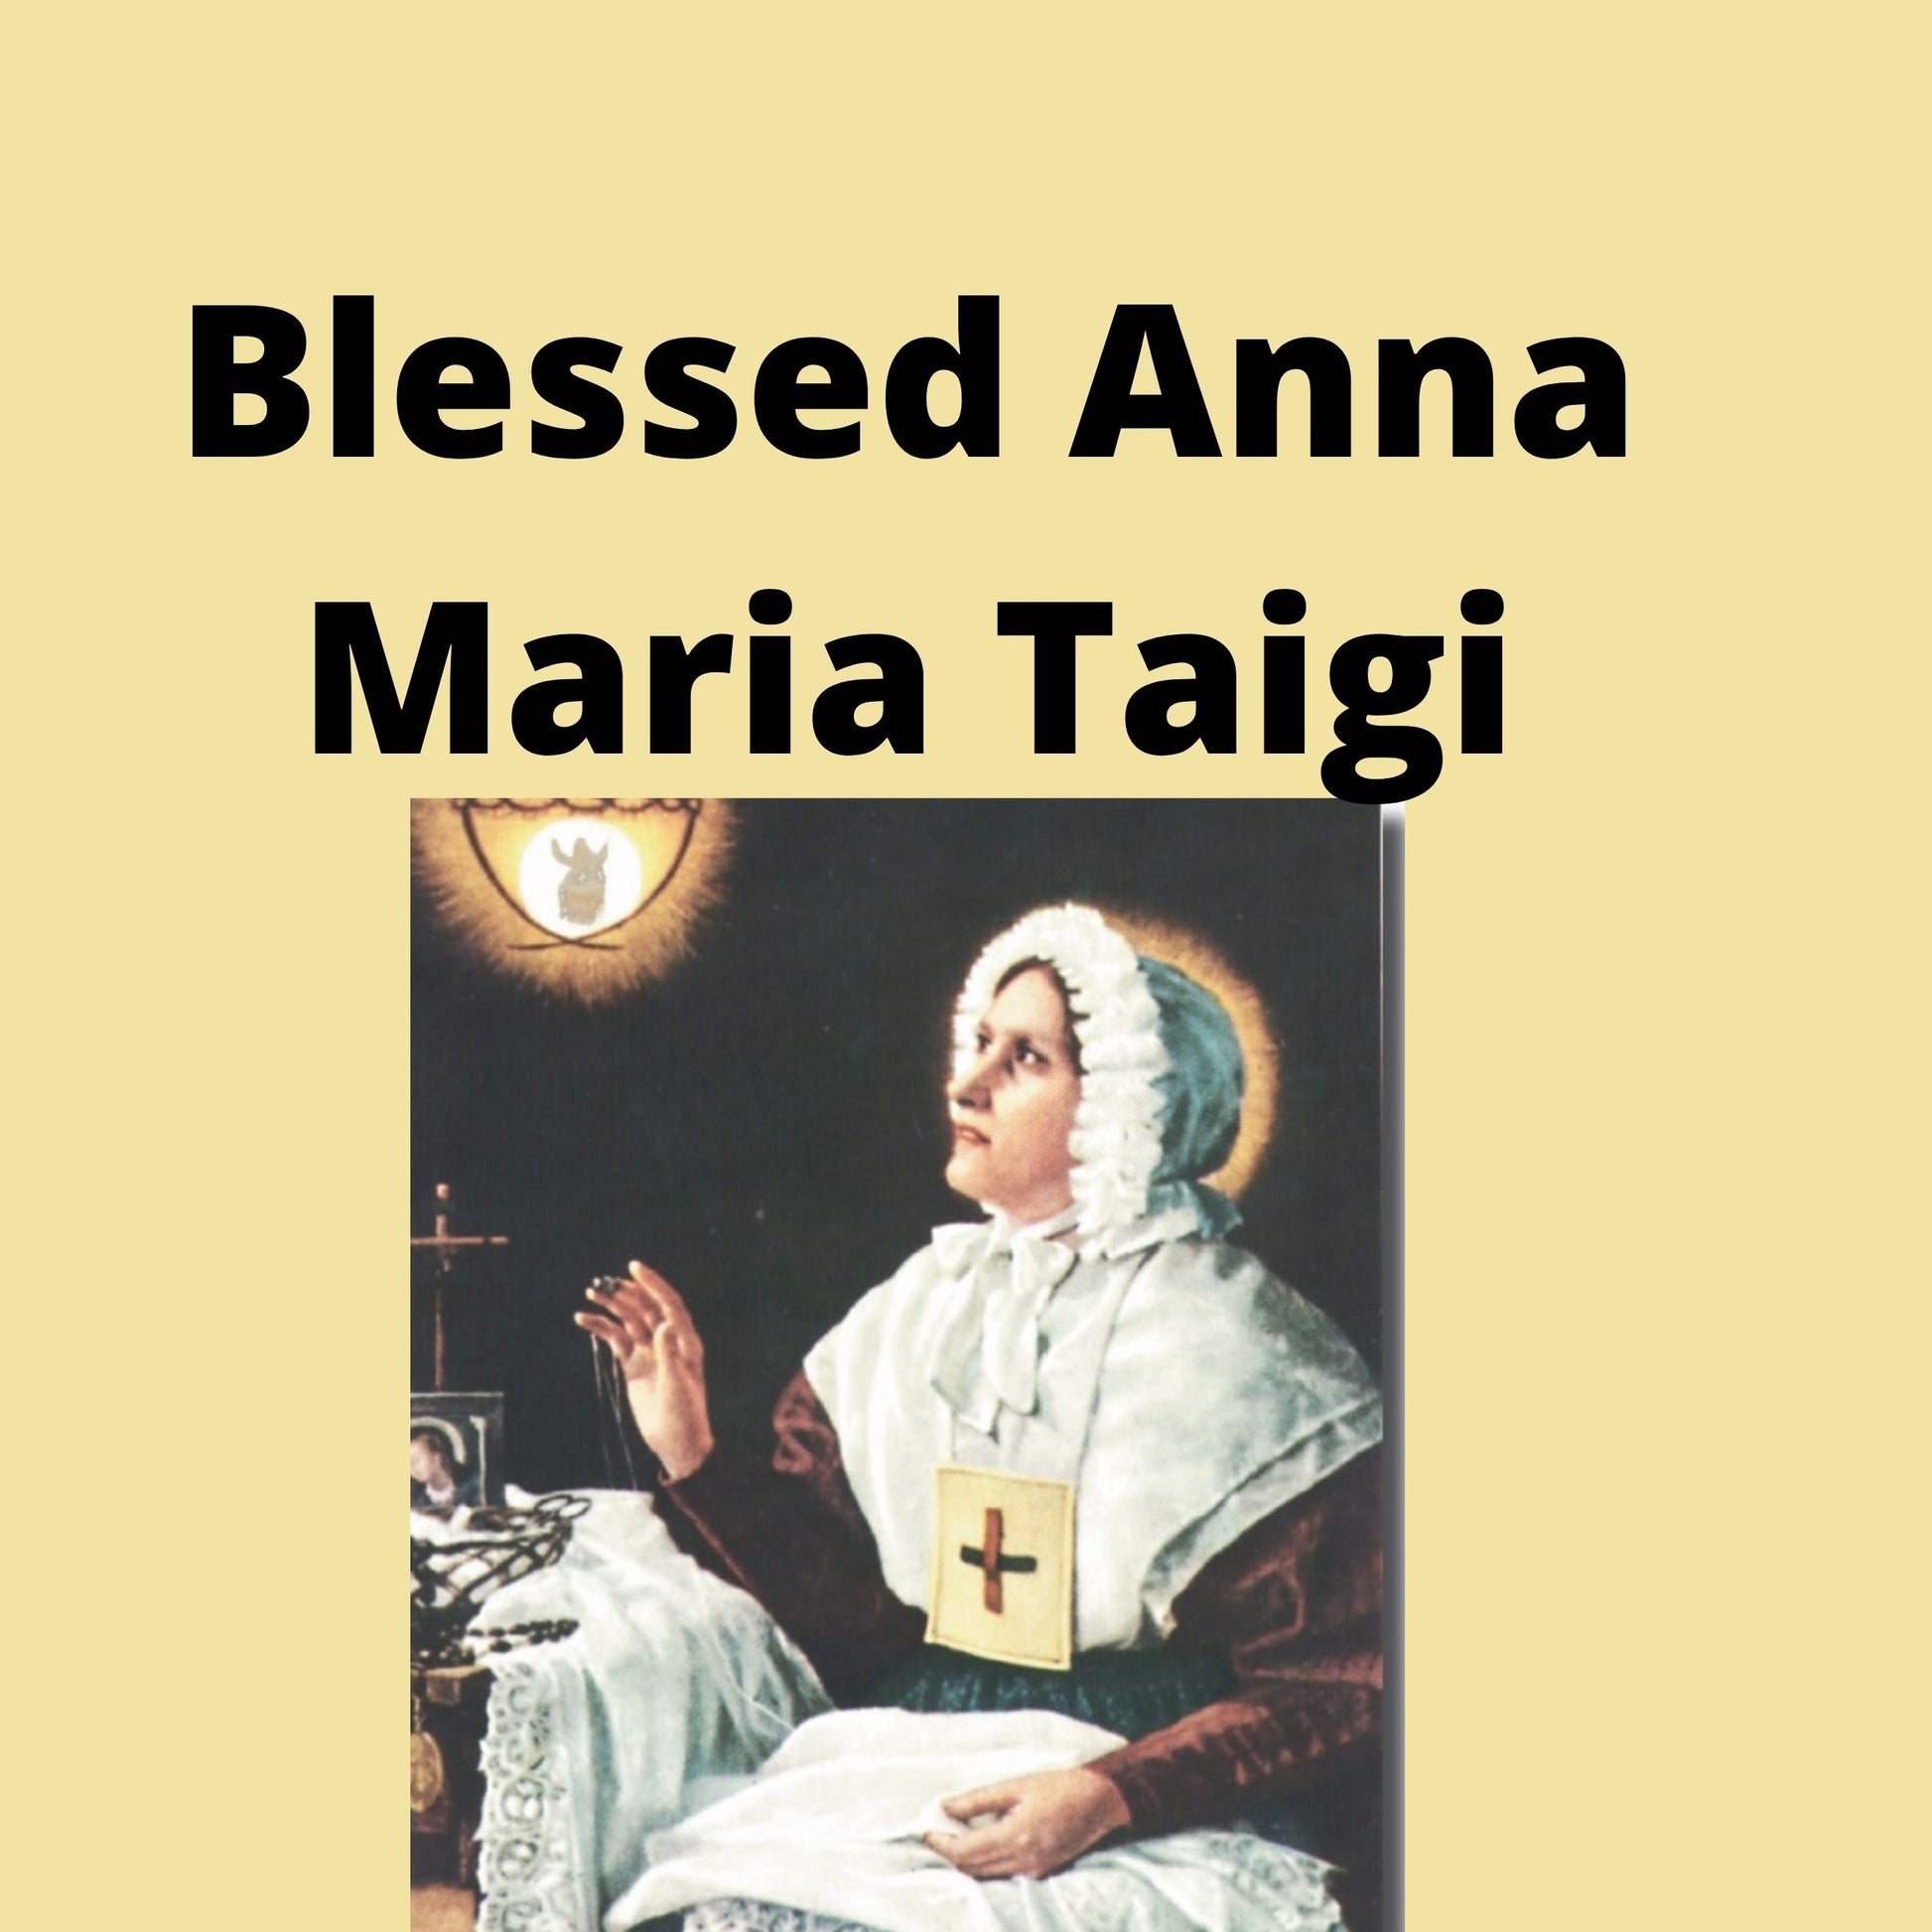 Blessed Anna Maria Taigi Video Download MP4 - Bob and Penny Lord